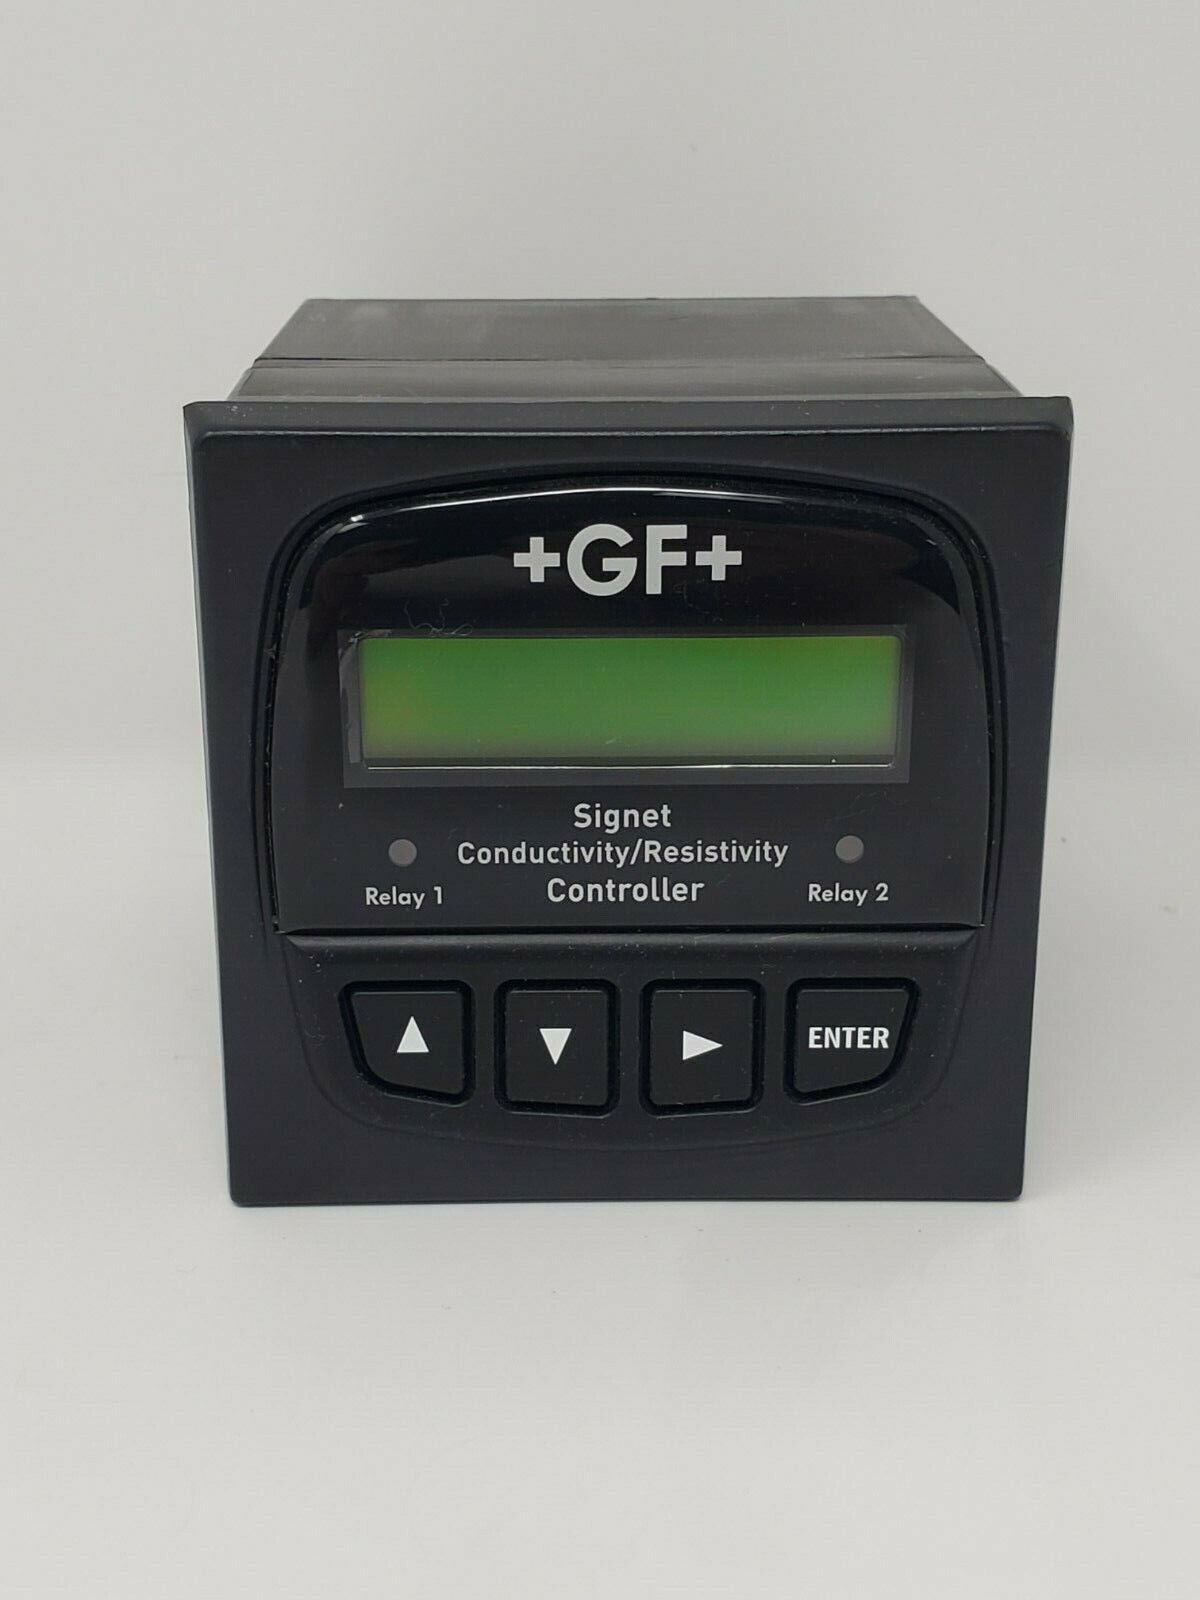 GF Signet 3-8860 Dual-Channel, Conductivity/Resistivity Controller, 12 to 24 VDC